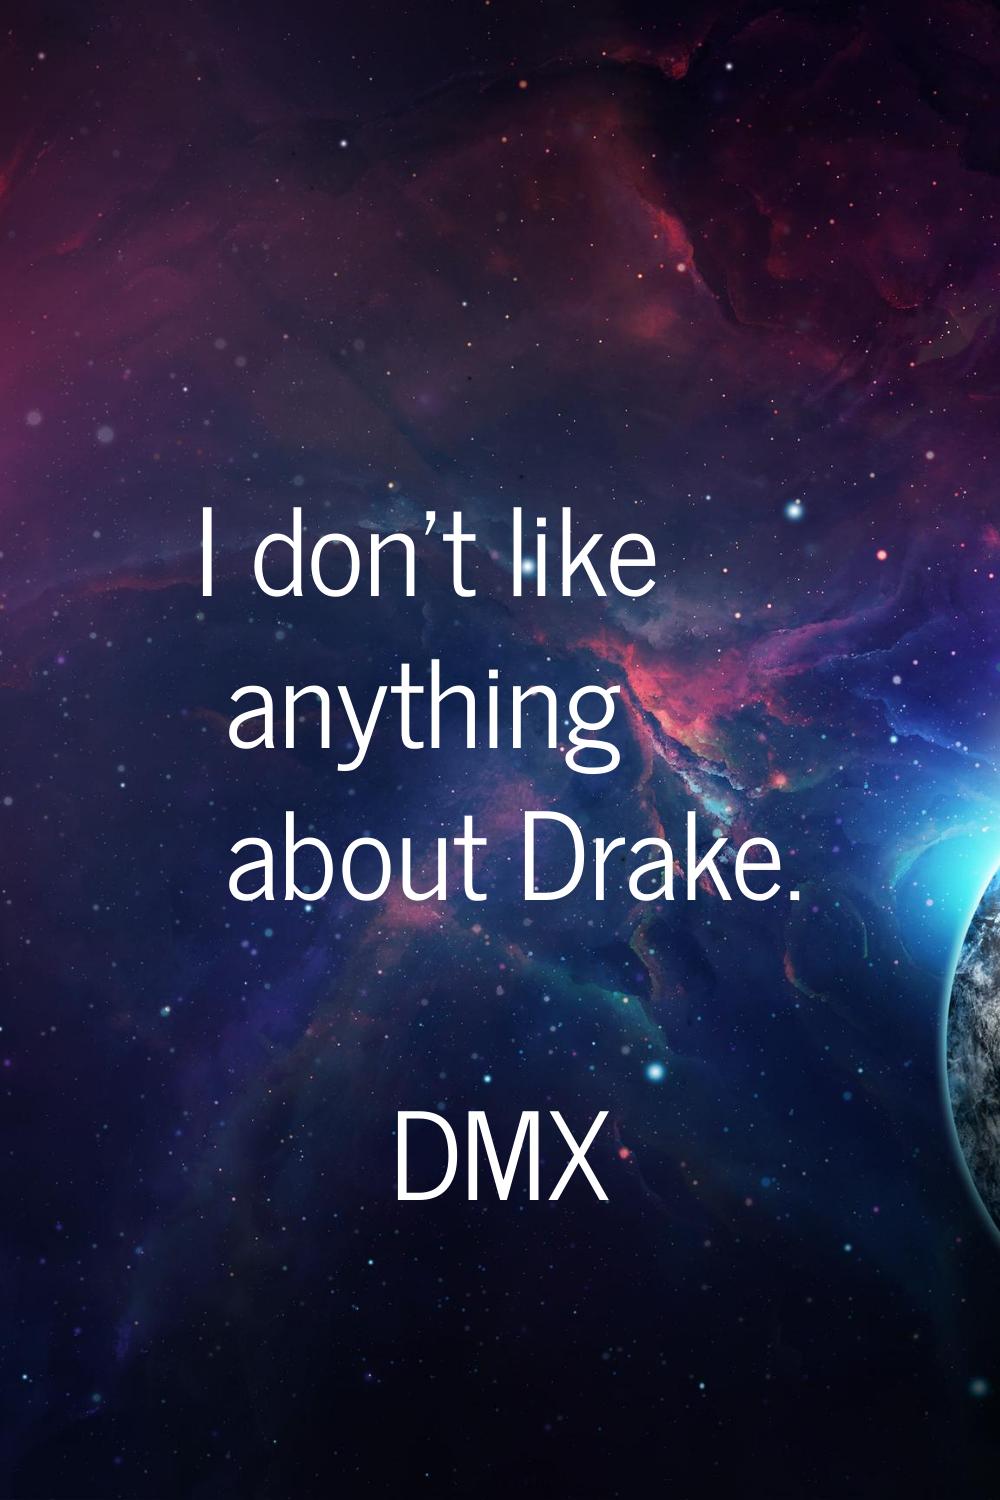 I don't like anything about Drake.